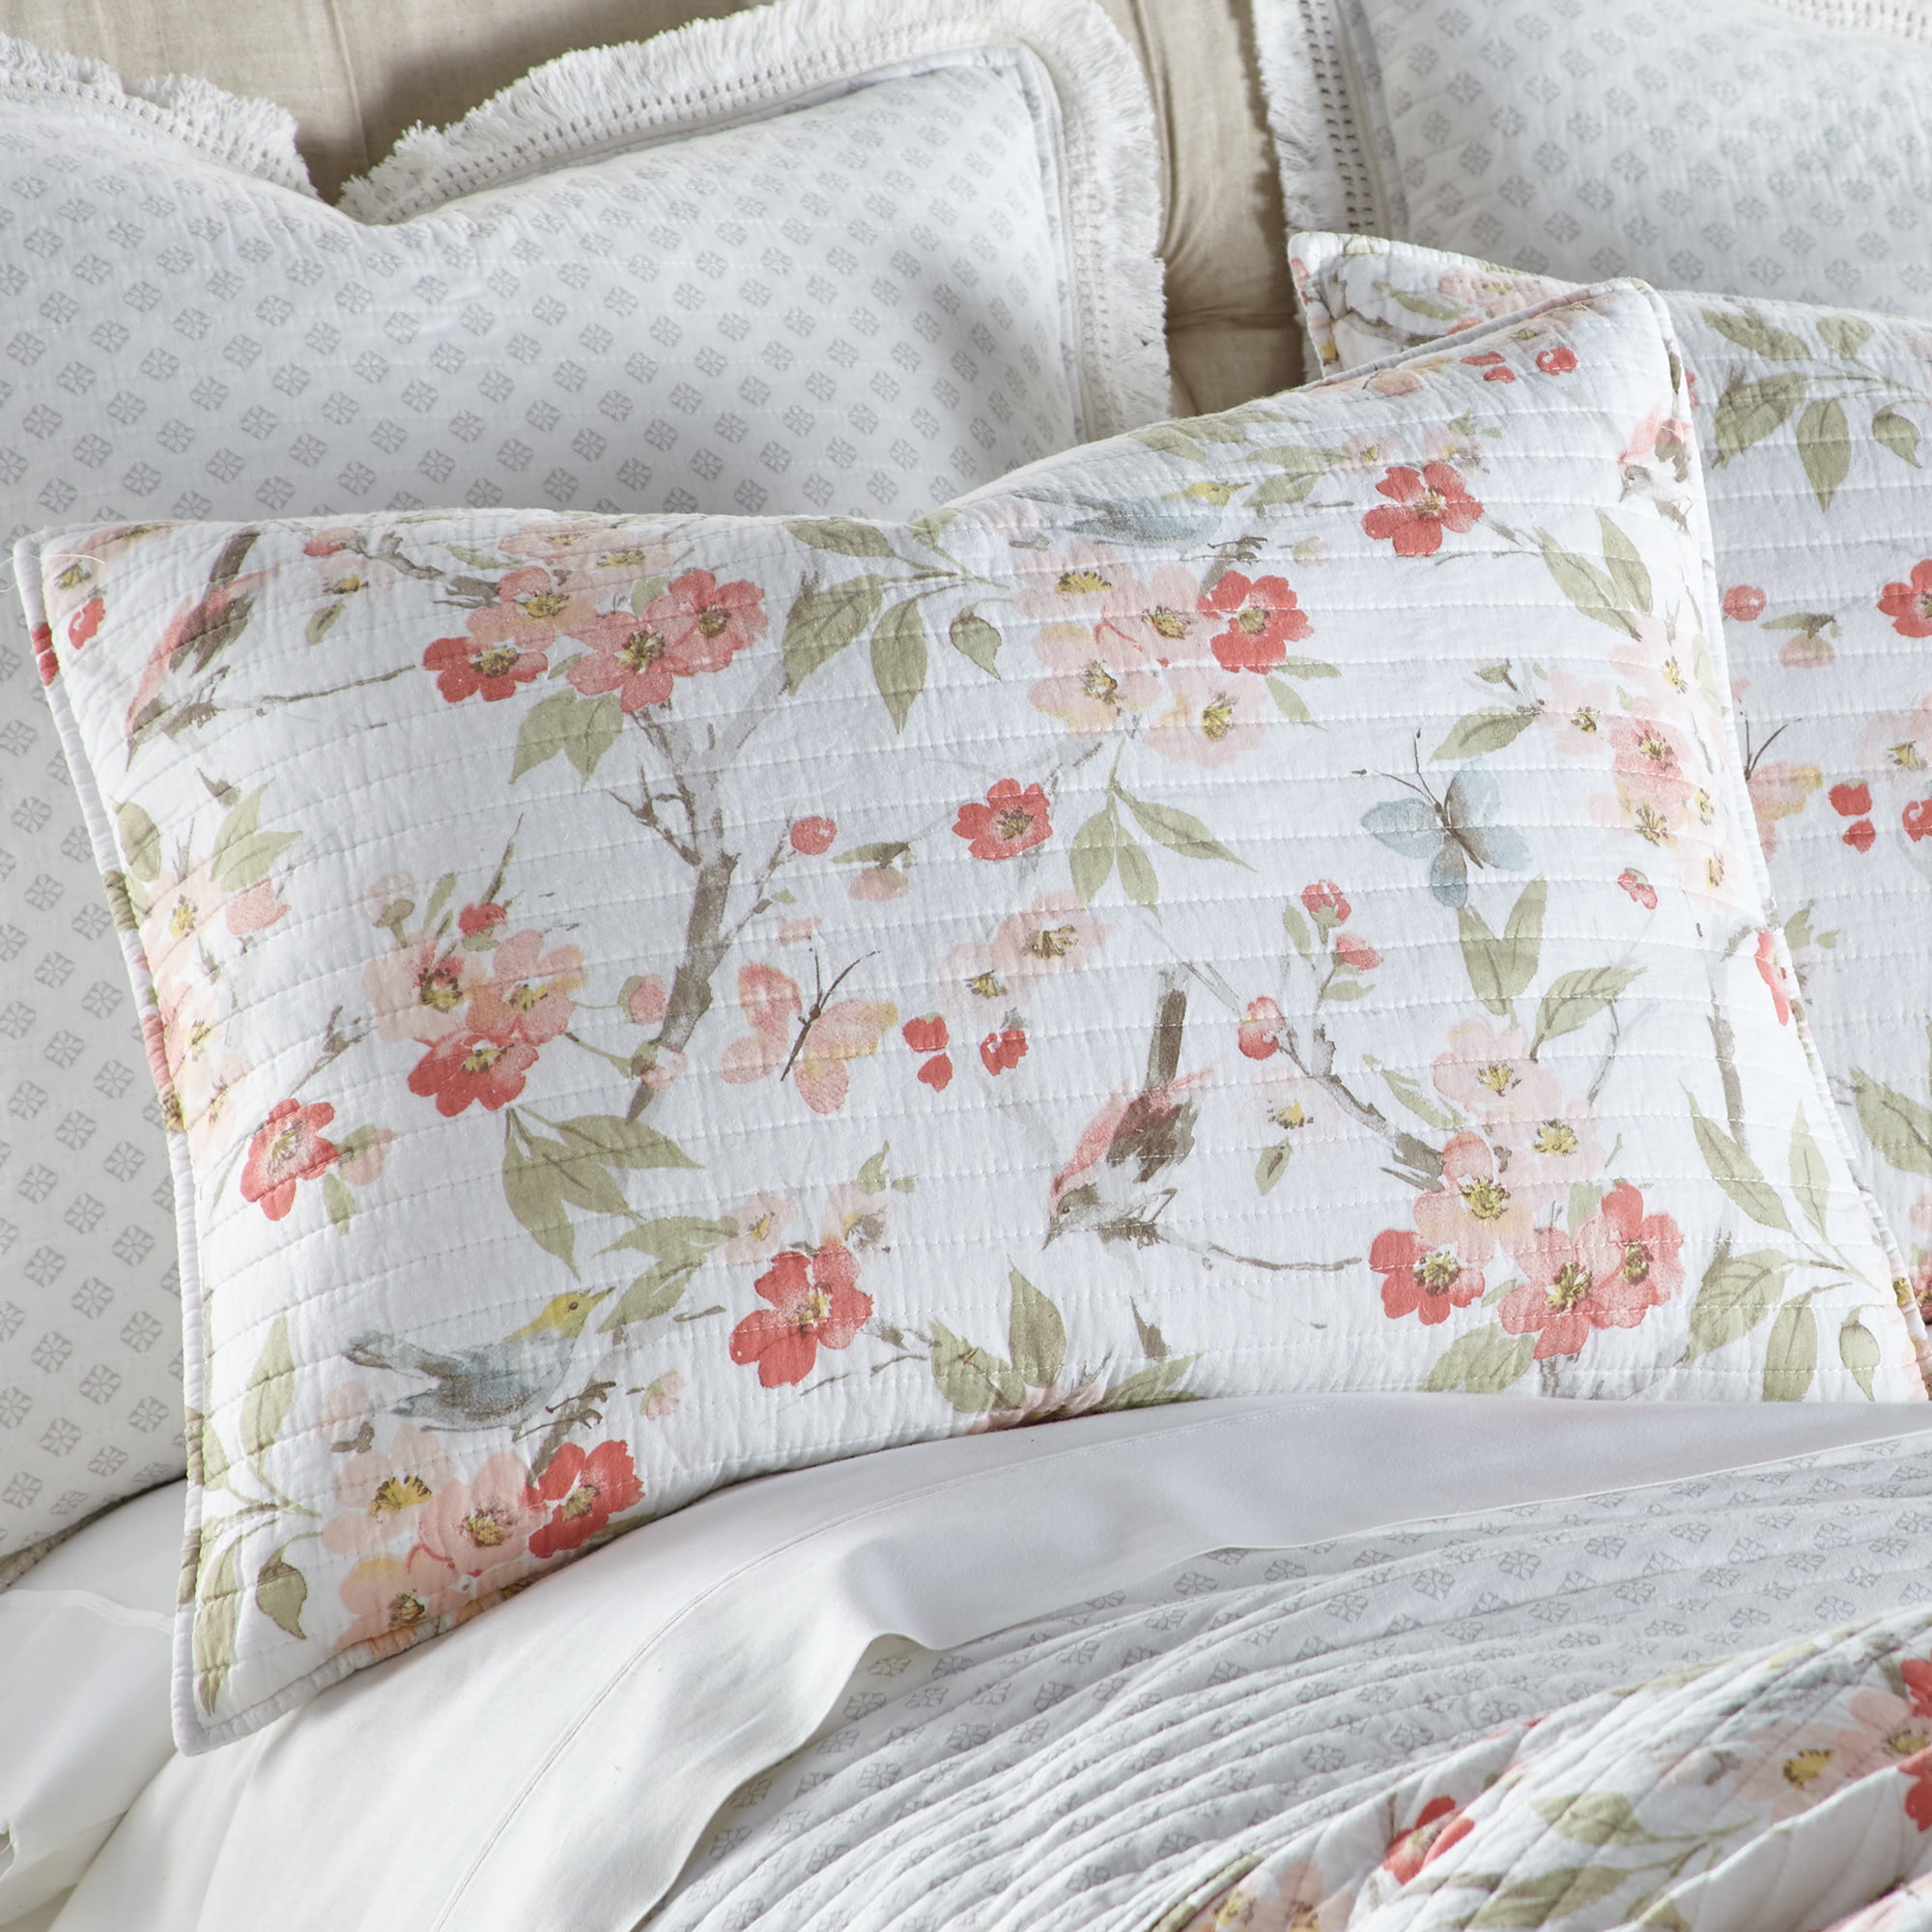 Levtex Home - Pippa Quilt Set - King Quilt + Two King Pillow Shams - Floral  Birds - Salmon, Blush, Pink and Grey - Quilt Size (106x92in.) and Pillow 